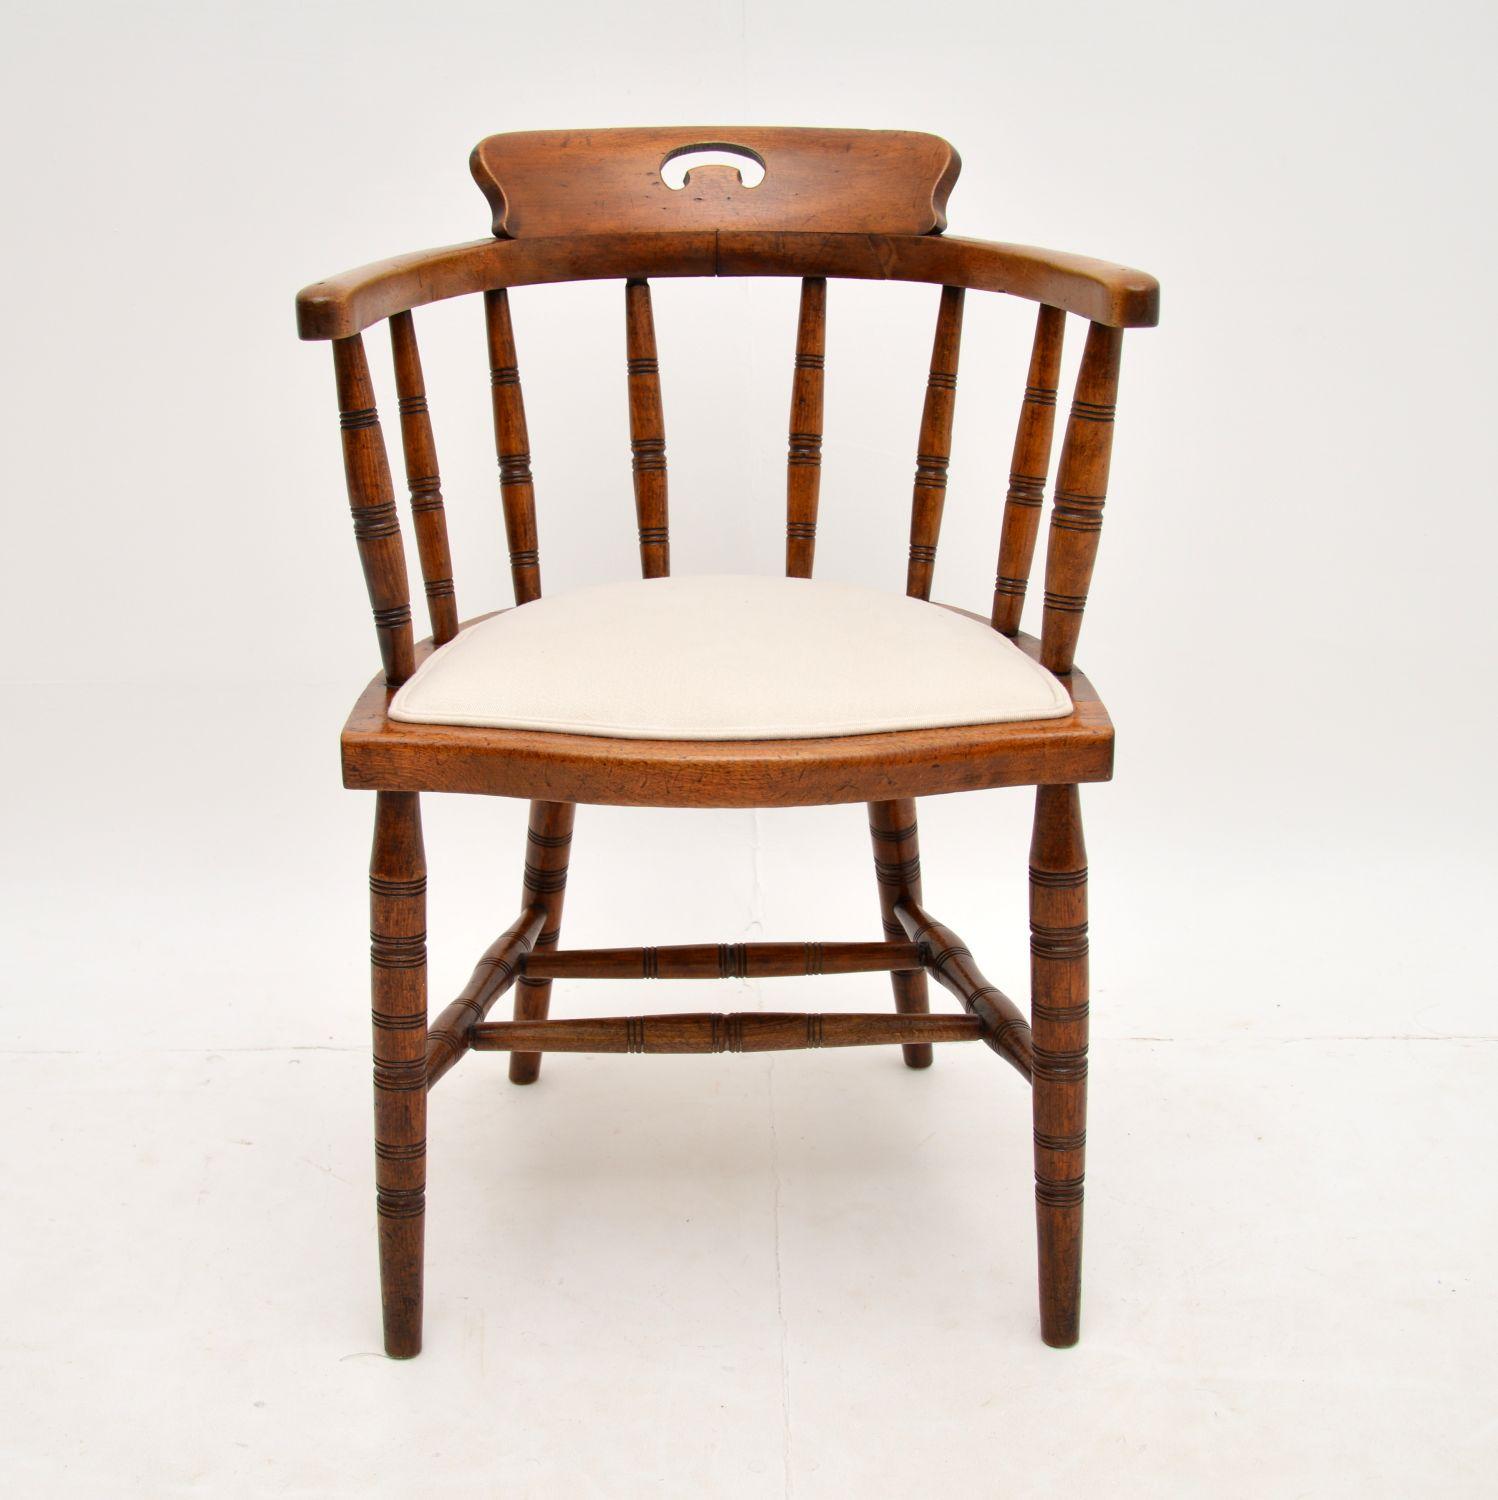 A smart and comfortable antique Victorian desk chair in solid mahogany. This dates from around the 1880-1890 period.

It is of excellent quality, with beautifully turned mahogany supports, turned legs, turned stretchers and a pierced back.

We